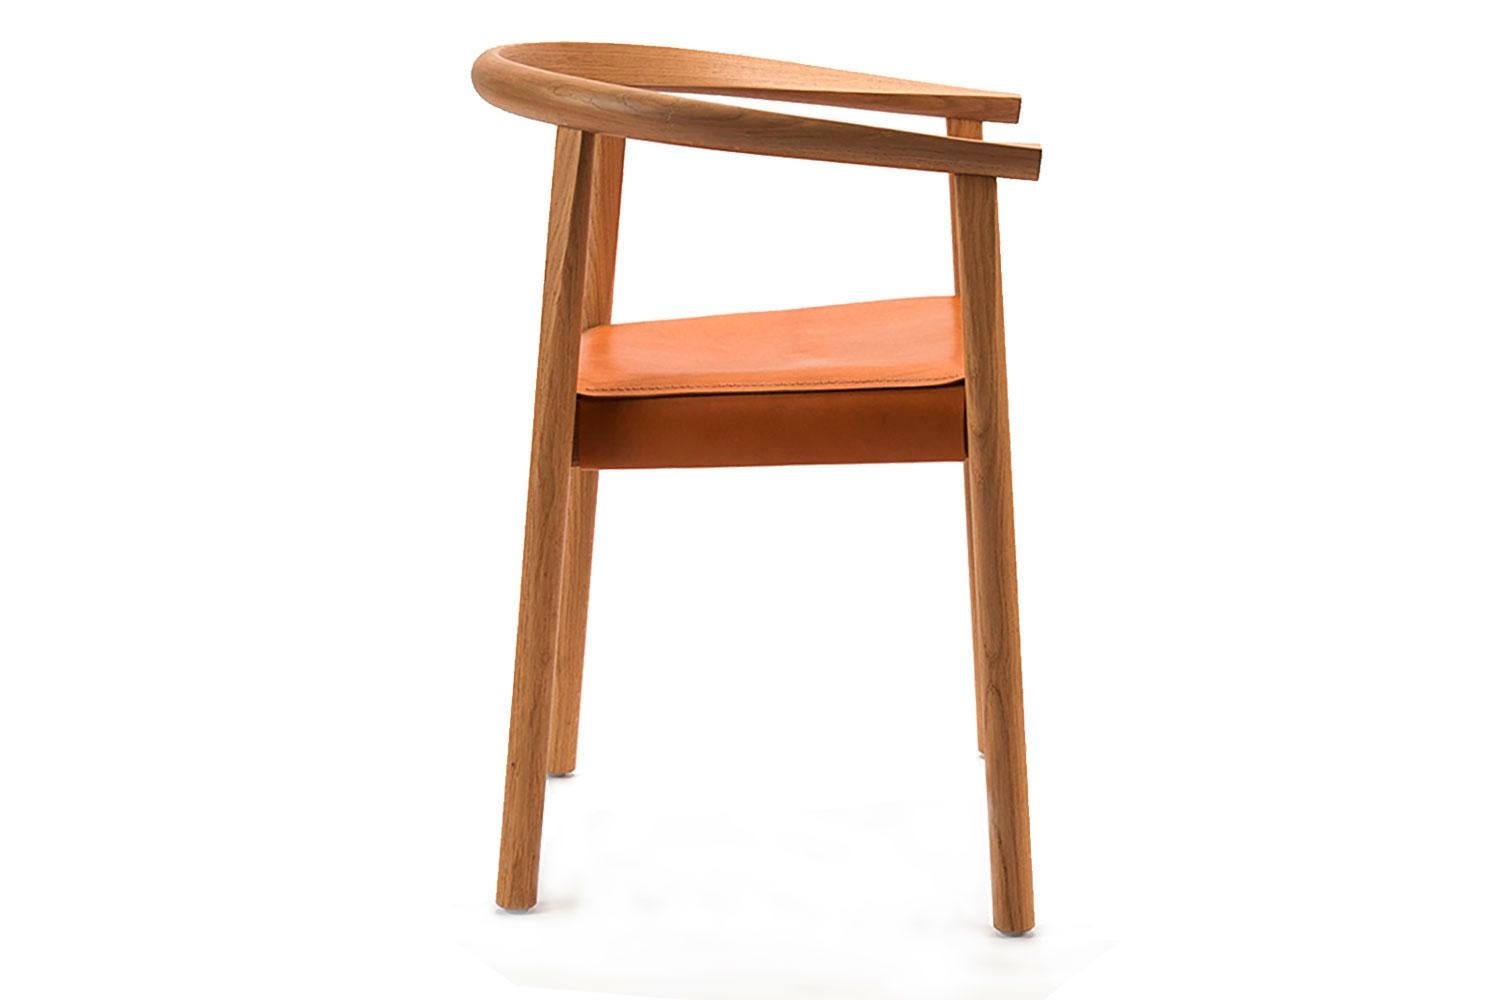 Modern White Oak Framed Dining Chair With Saddle Leather Seat by Bensen - Available Now